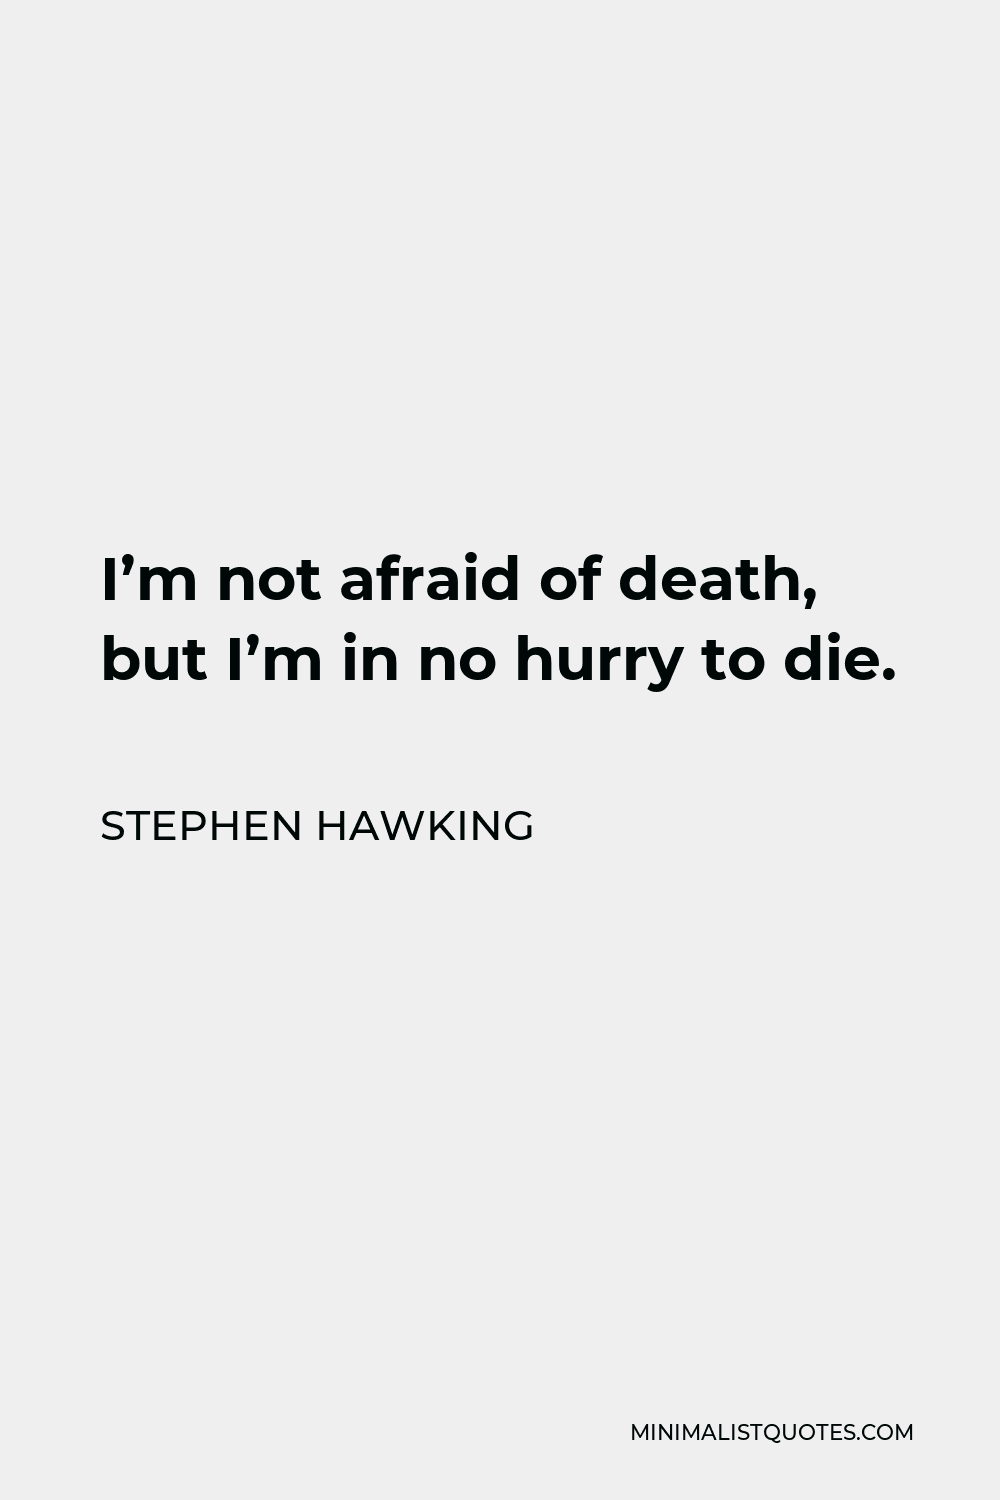 Stephen Hawking Quote - I’m not afraid of death, but I’m in no hurry to die.